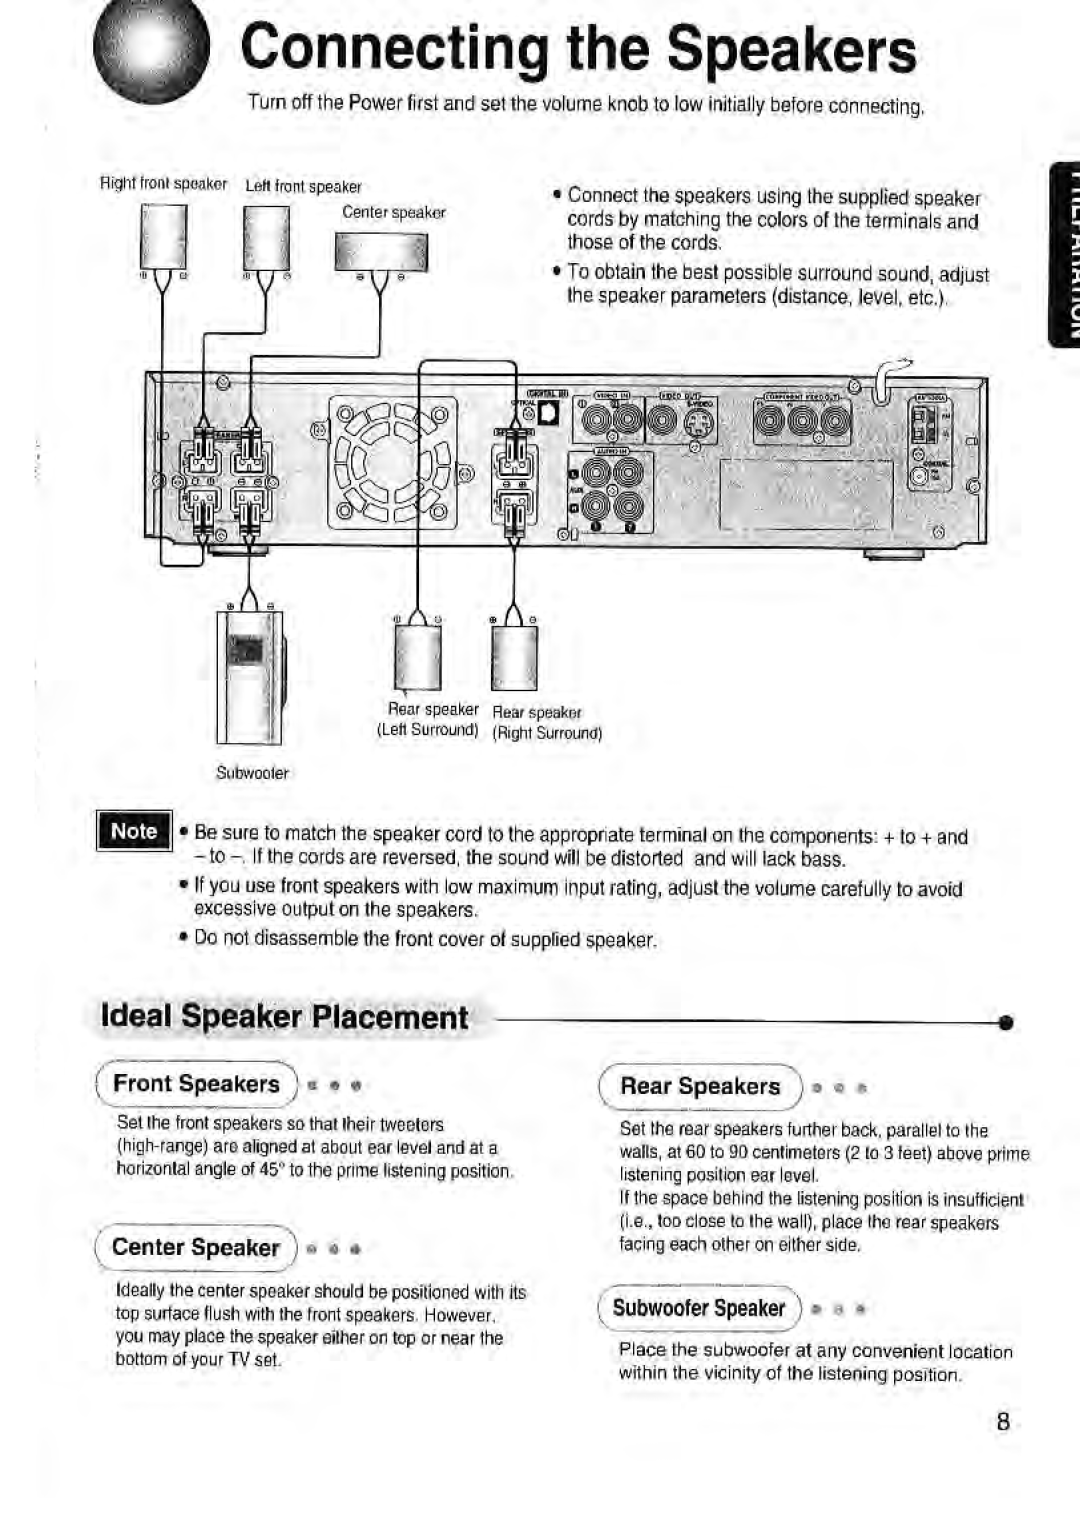 Toshiba SD-43HK owner manual Connecting the Speakers, Ideal Speaker Placement, Subwooter Speaker j 